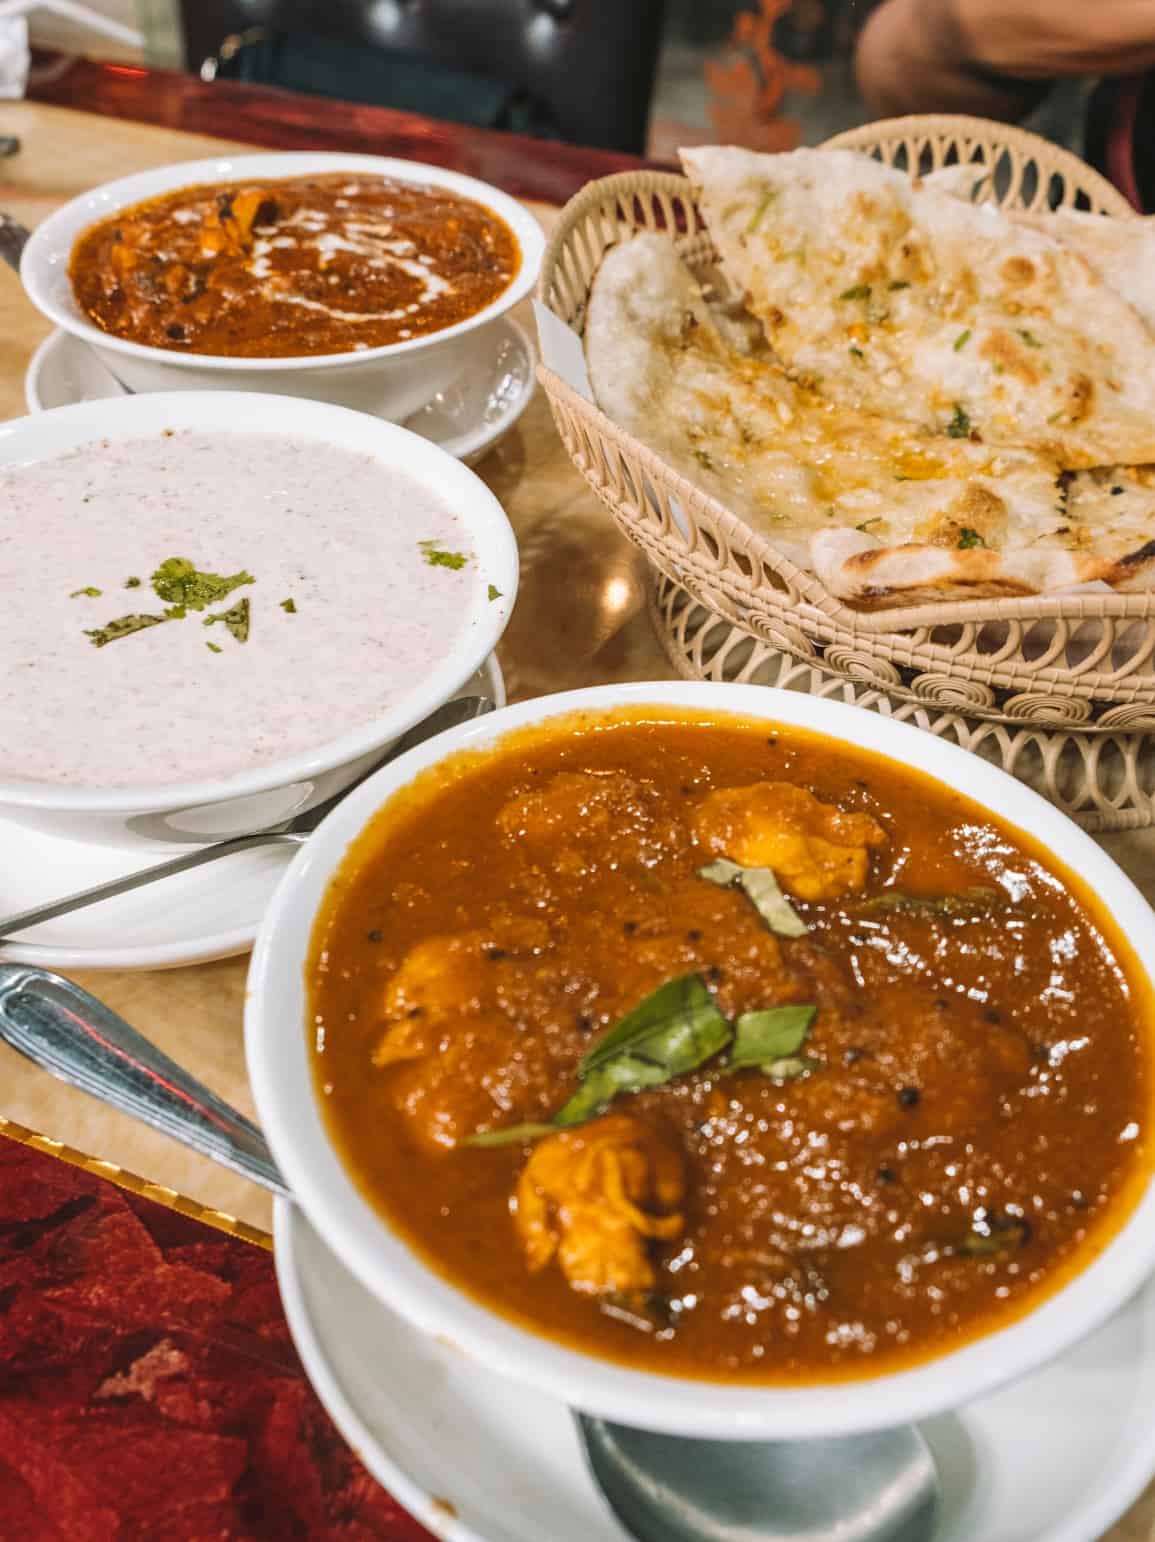 Delhi Darbar 2 serves some of the best Indian food in Patong Beach